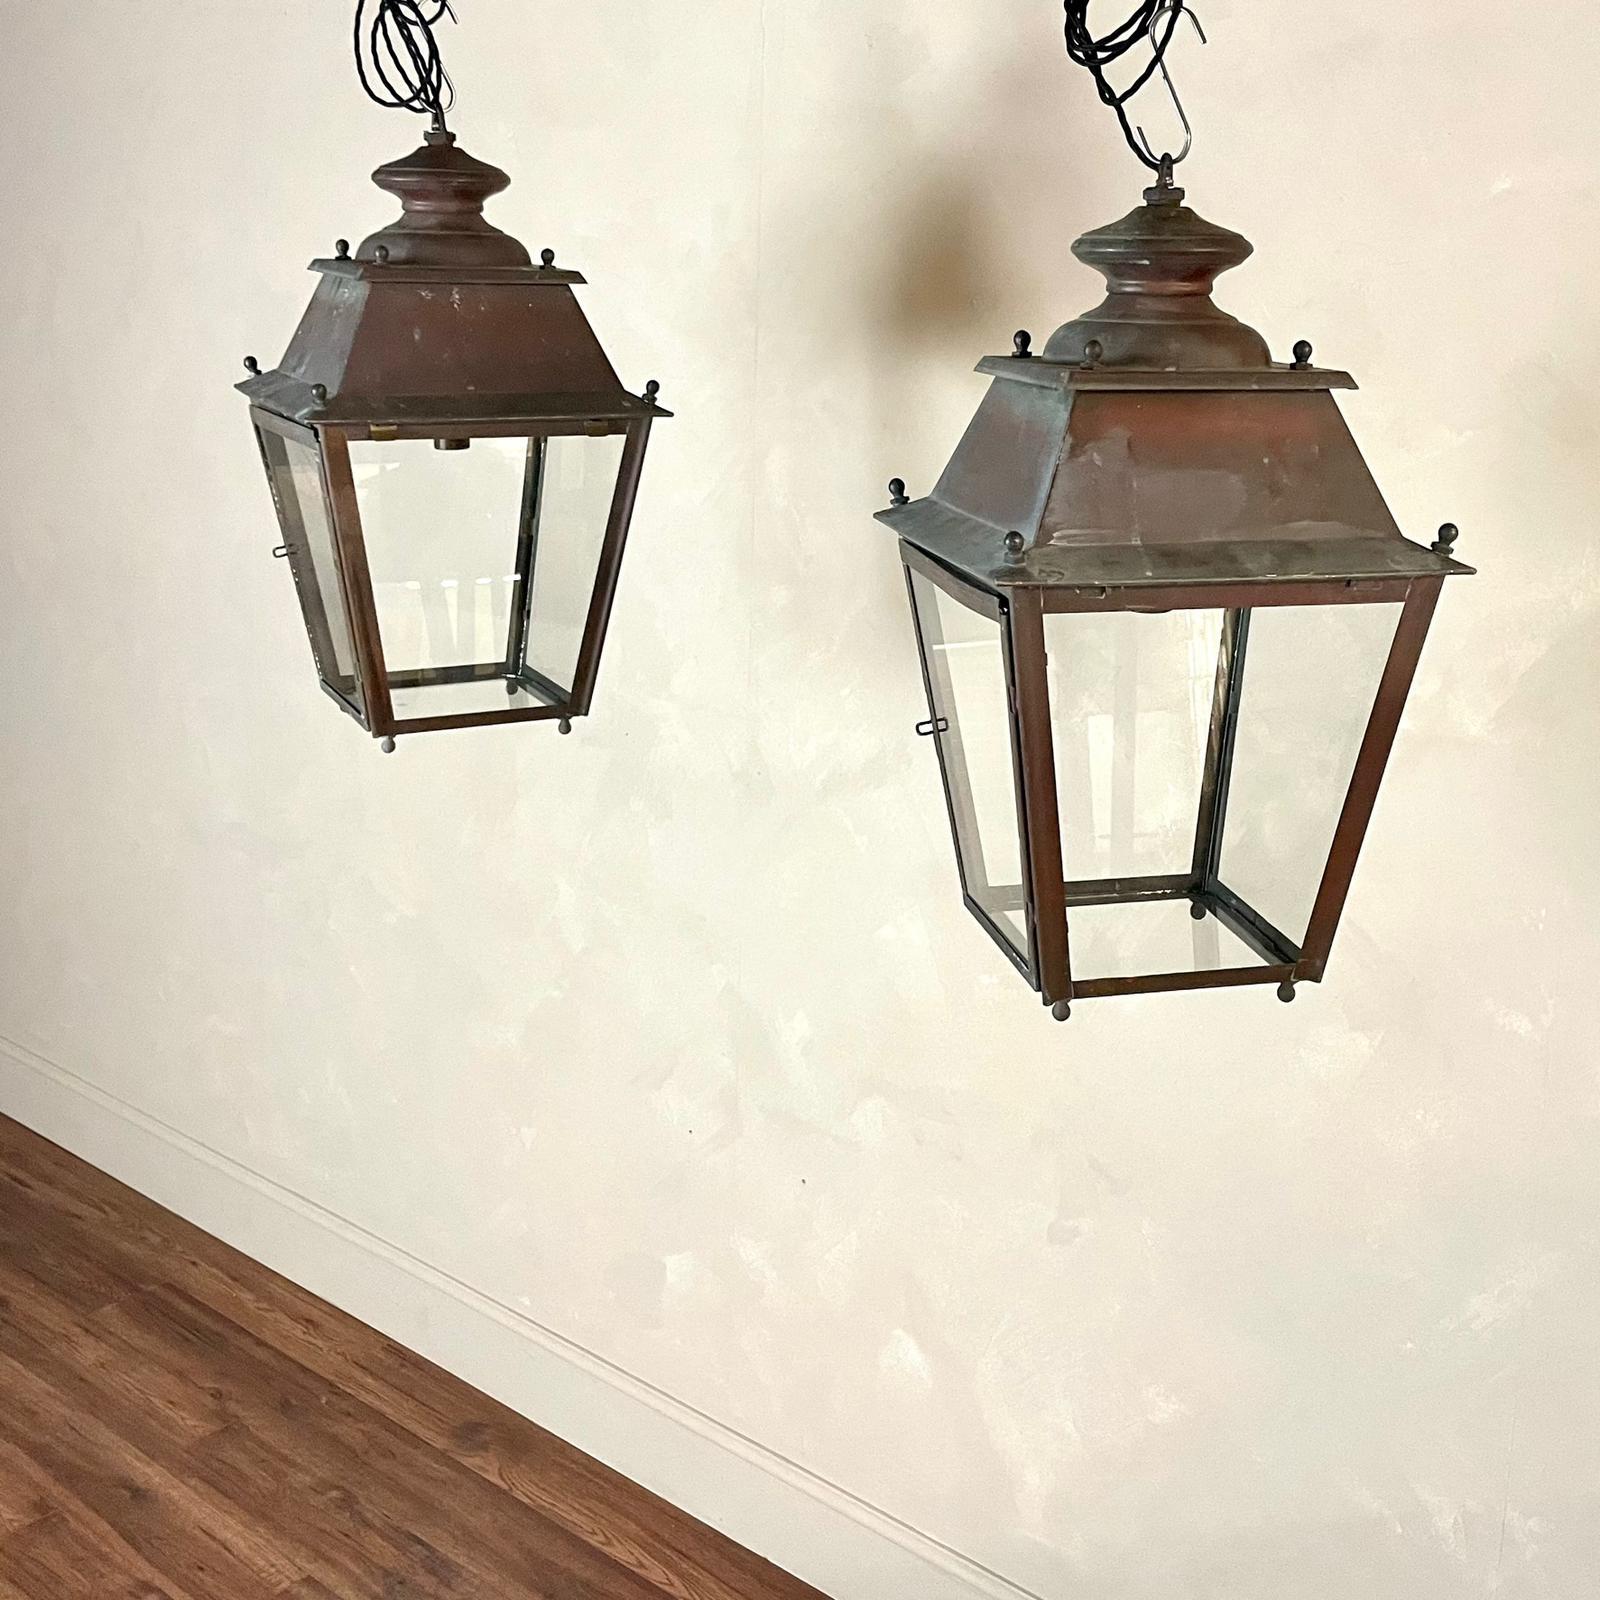 A superb pair of 20th century copper lanterns featuring a rounded spire to top surrounded by four ball finials set on an outward roof. 
Newly glazed panels that taper inward, and glazed on the base ending with four ball finials. One of the panels